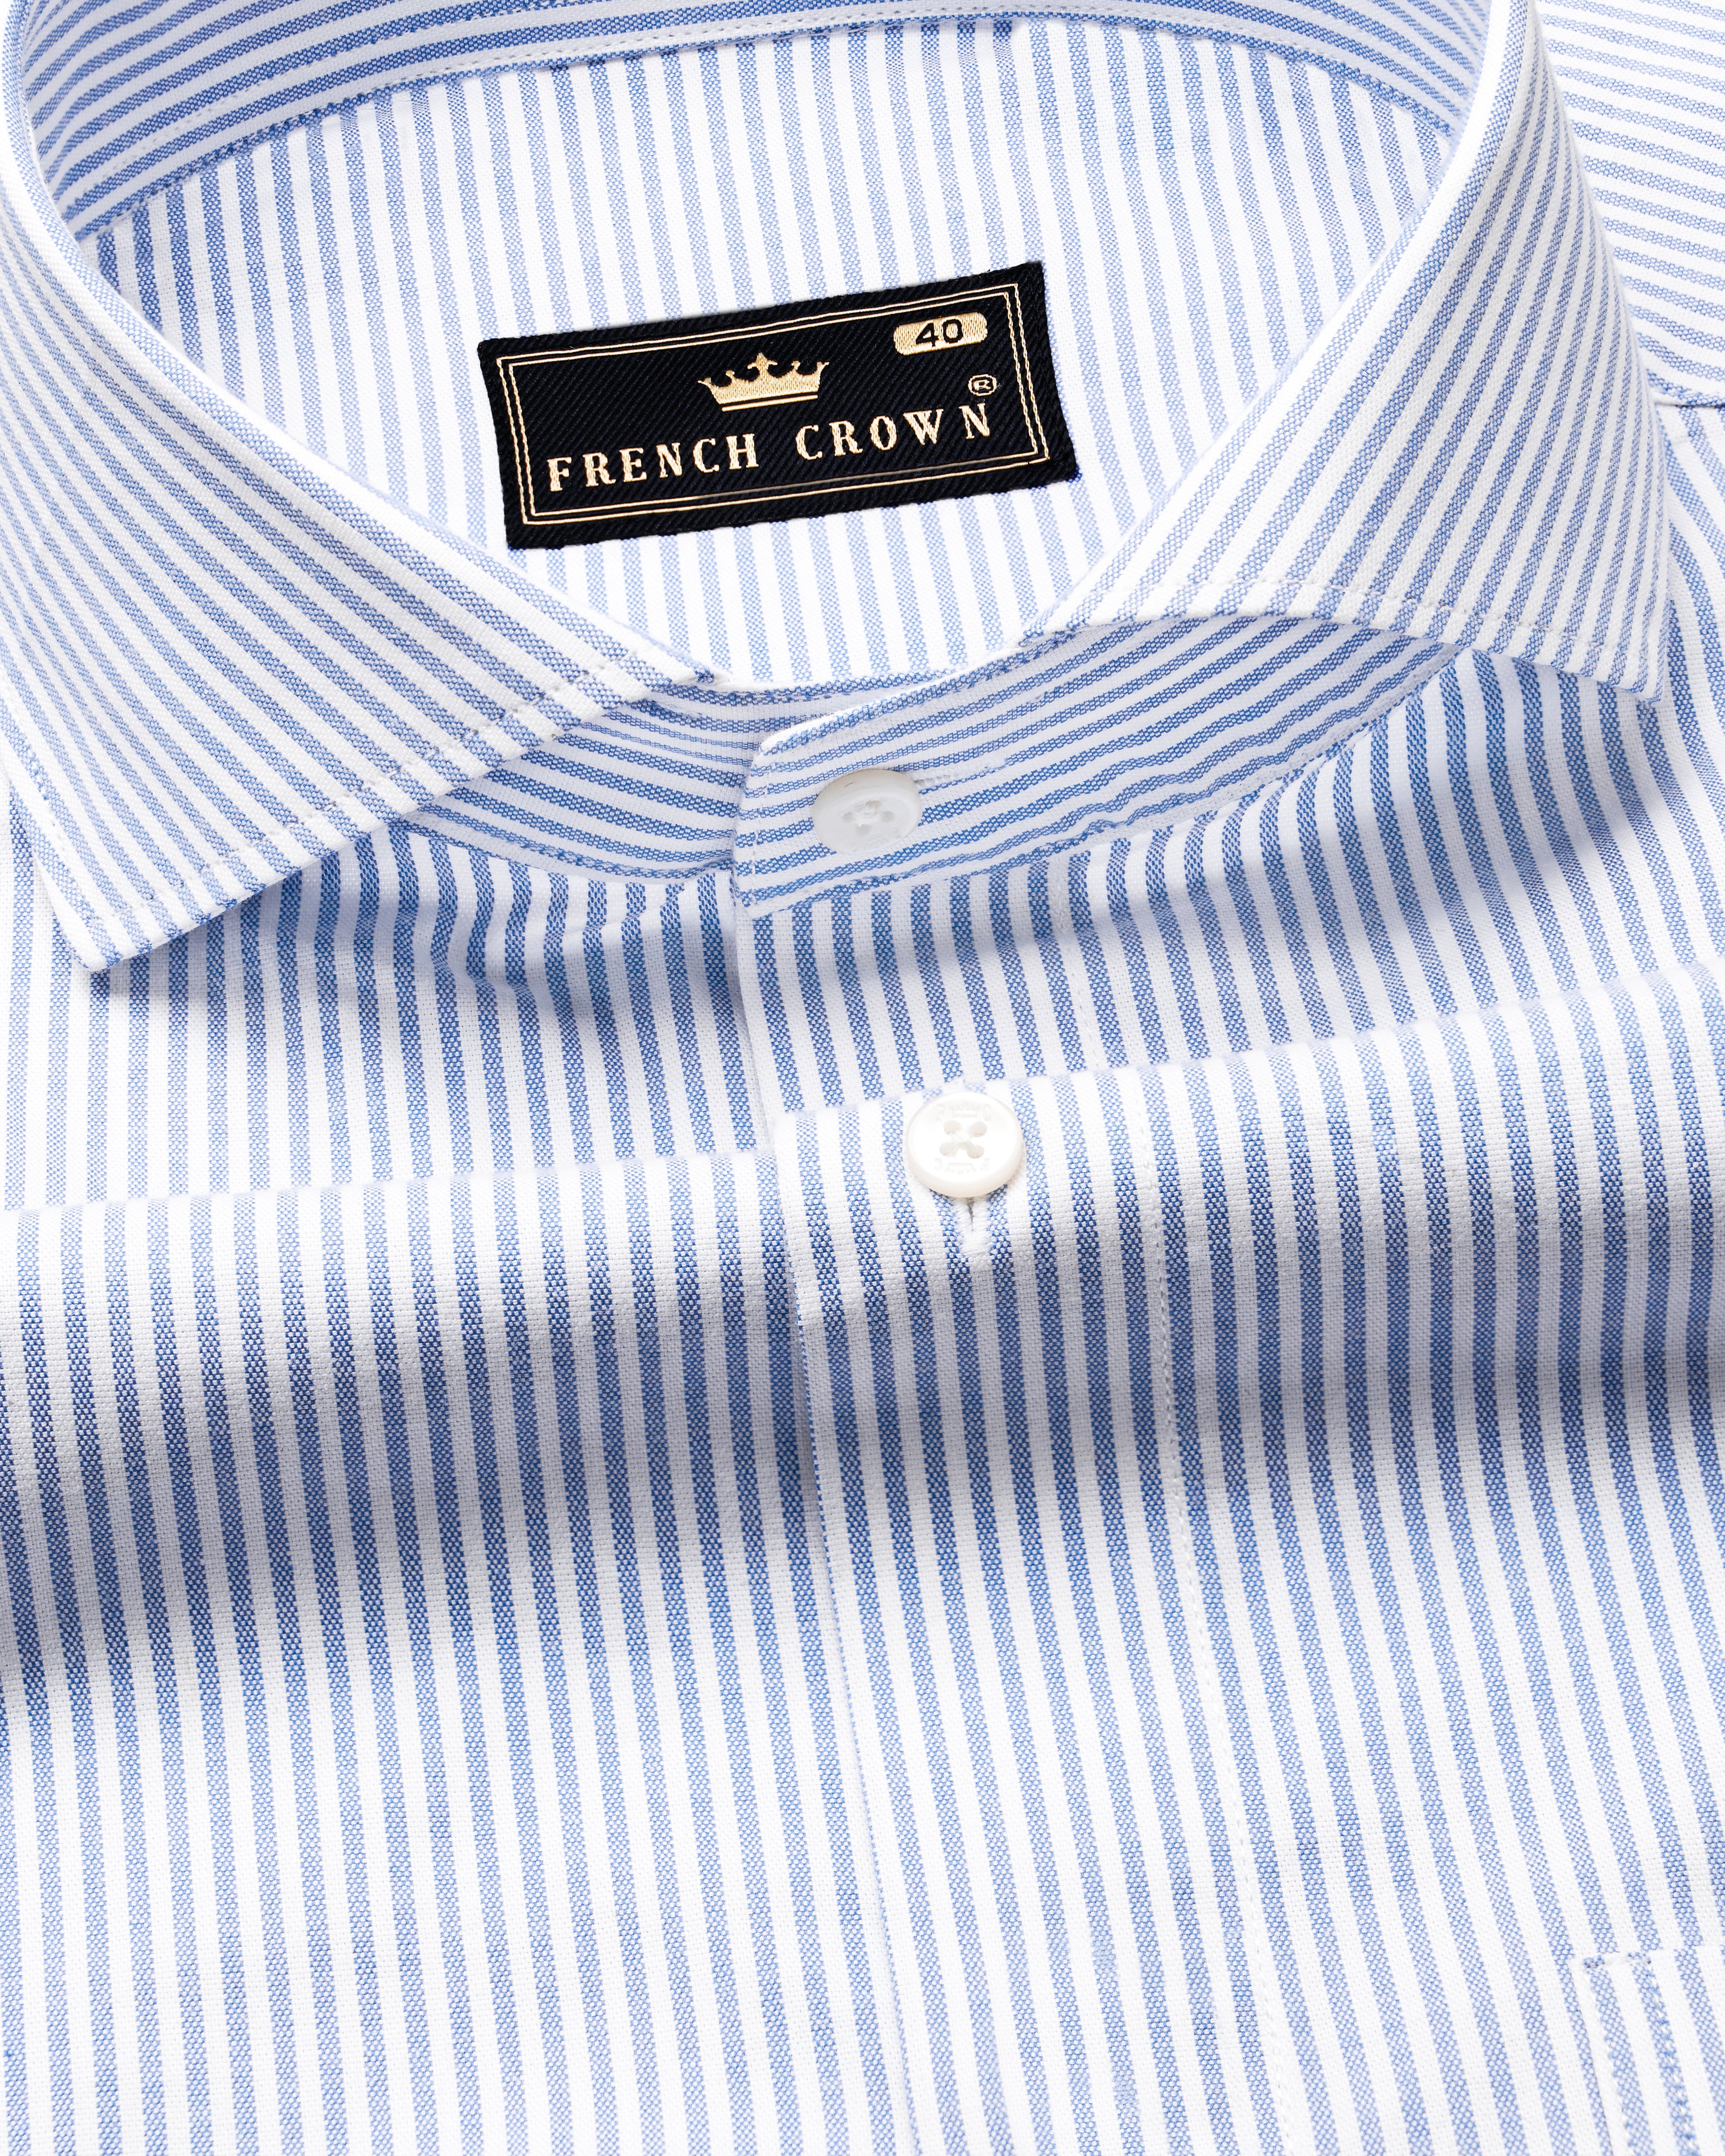 Glaucous Blue and White Striped Royal Oxford Shirt 9833-CA-38, 9833-CA-H-38, 9833-CA-39, 9833-CA-H-39, 9833-CA-40, 9833-CA-H-40, 9833-CA-42, 9833-CA-H-42, 9833-CA-44, 9833-CA-H-44, 9833-CA-46, 9833-CA-H-46, 9833-CA-48, 9833-CA-H-48, 9833-CA-50, 9833-CA-H-50, 9833-CA-52, 9833-CA-H-52